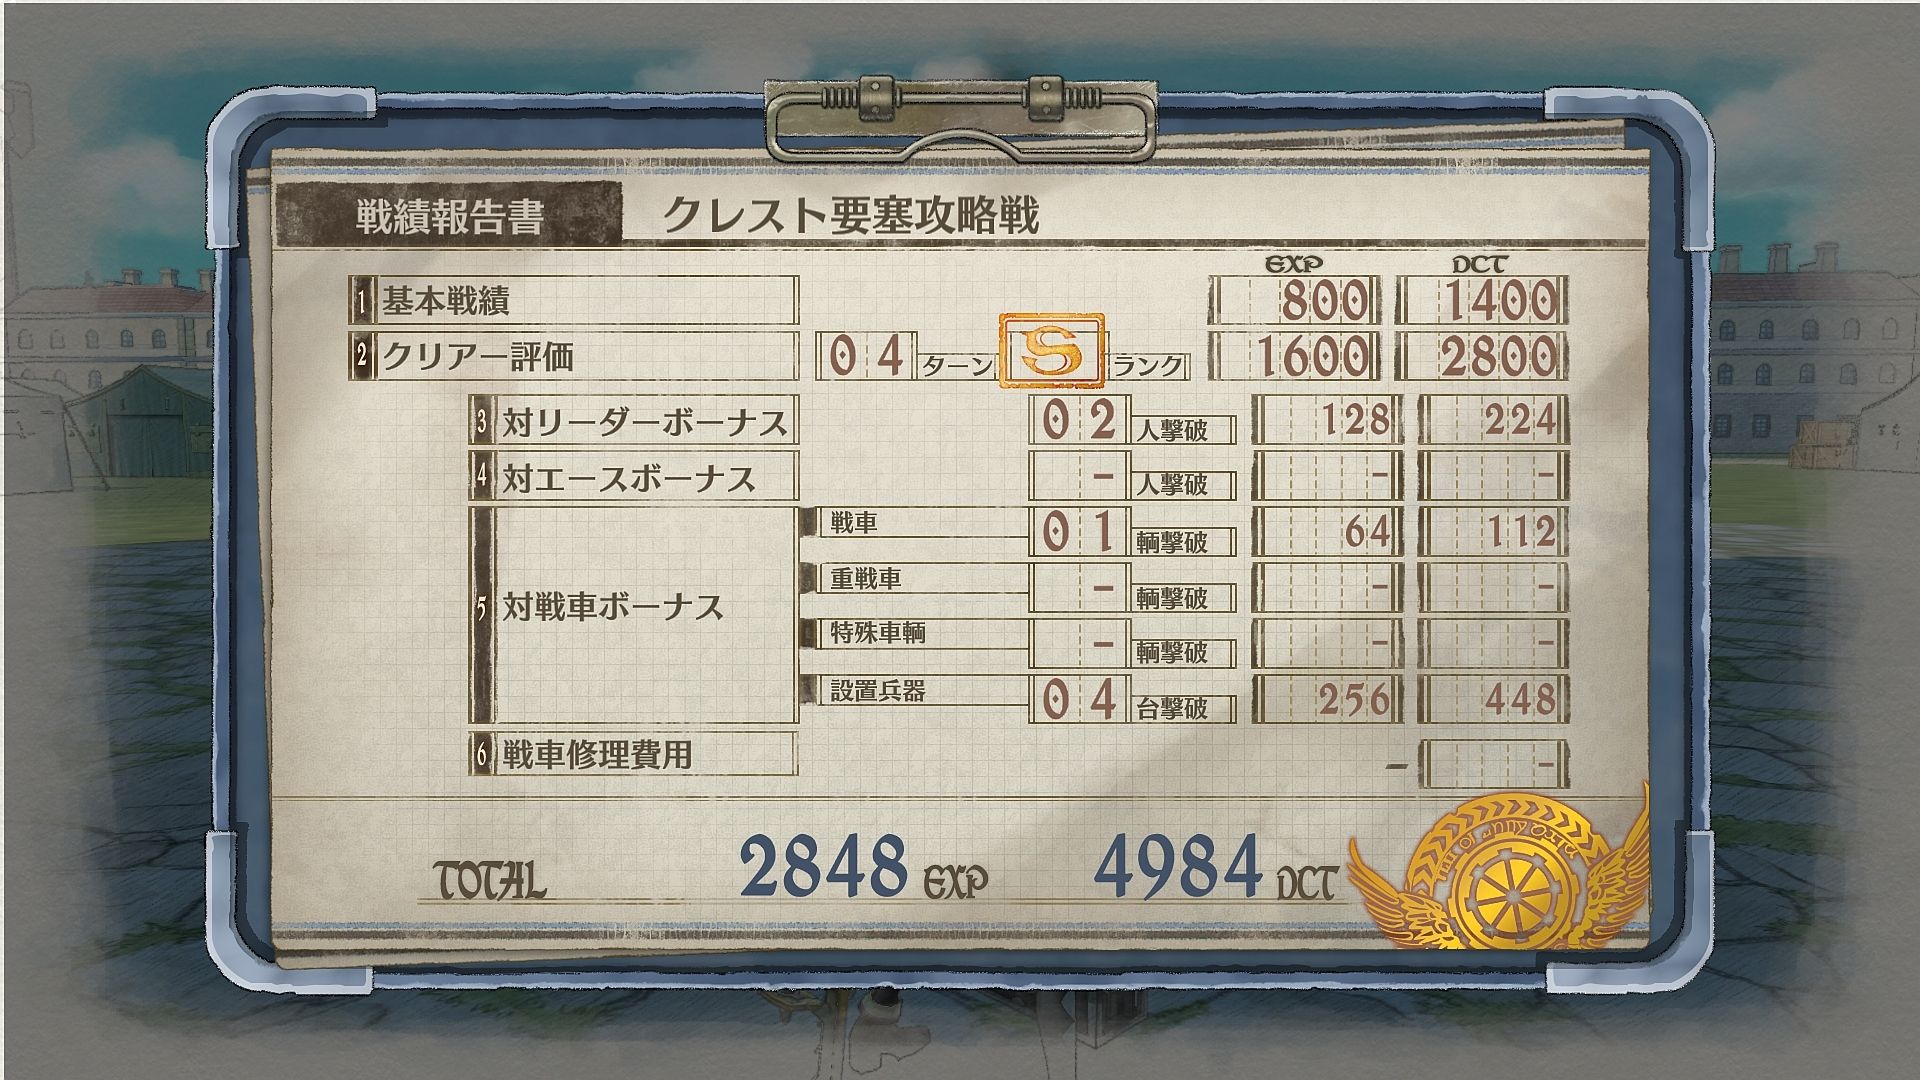 http://www.perfectly-nintendo.com/wp-content/gallery/valkyria-chronicles-4-27-12-2017/19.jpg